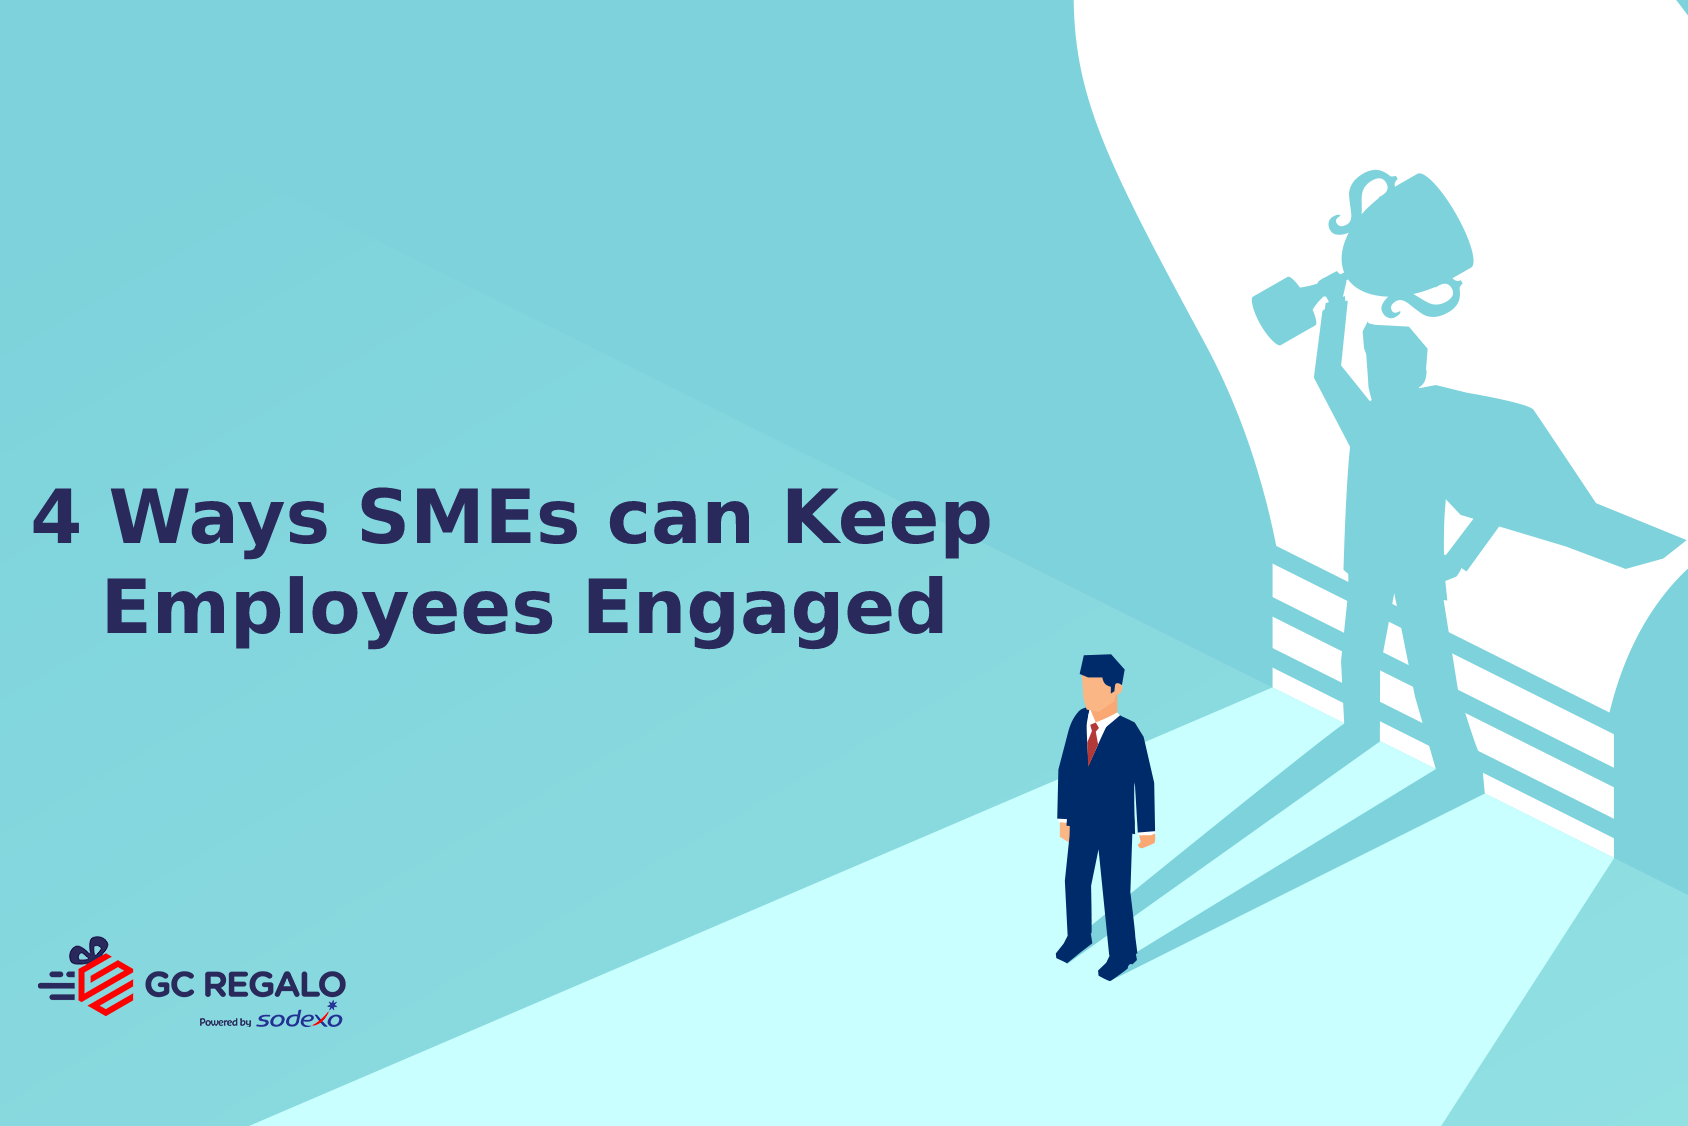 4 Ways SMEs can Keep Employees Engaged